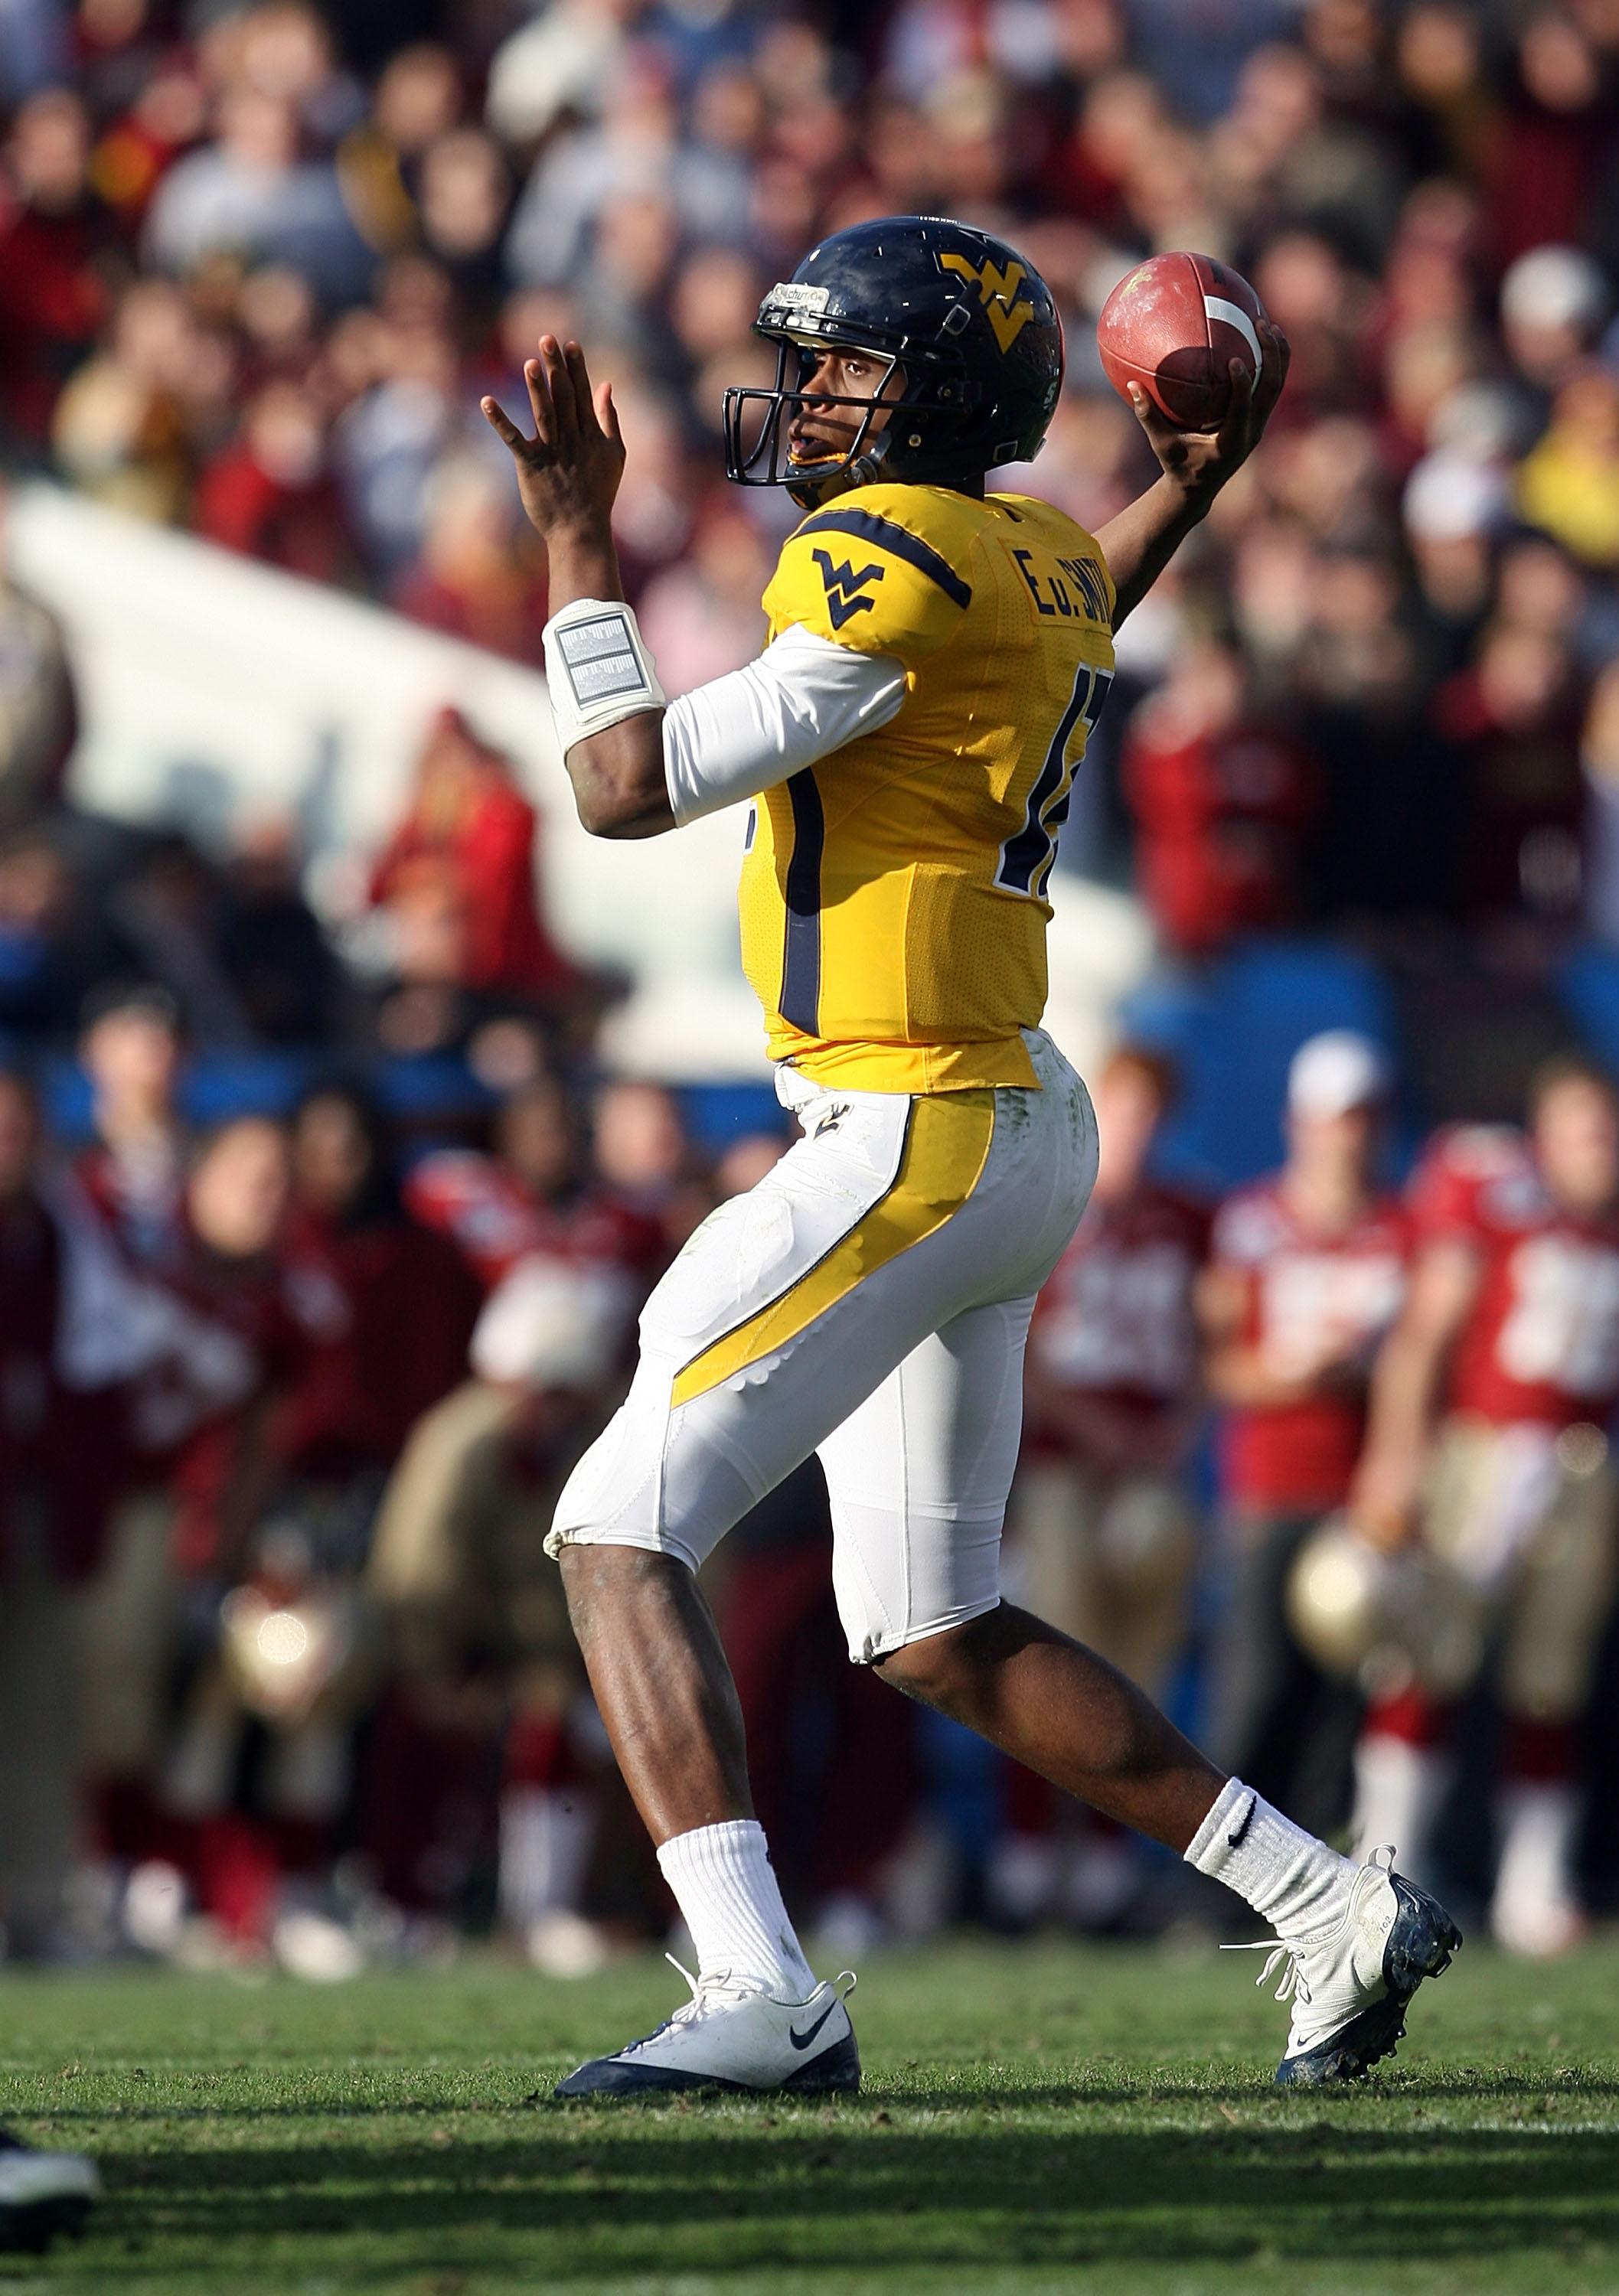 West Virginia Football 10 Things You Need To Know About Geno Smith News Scores Highlights 